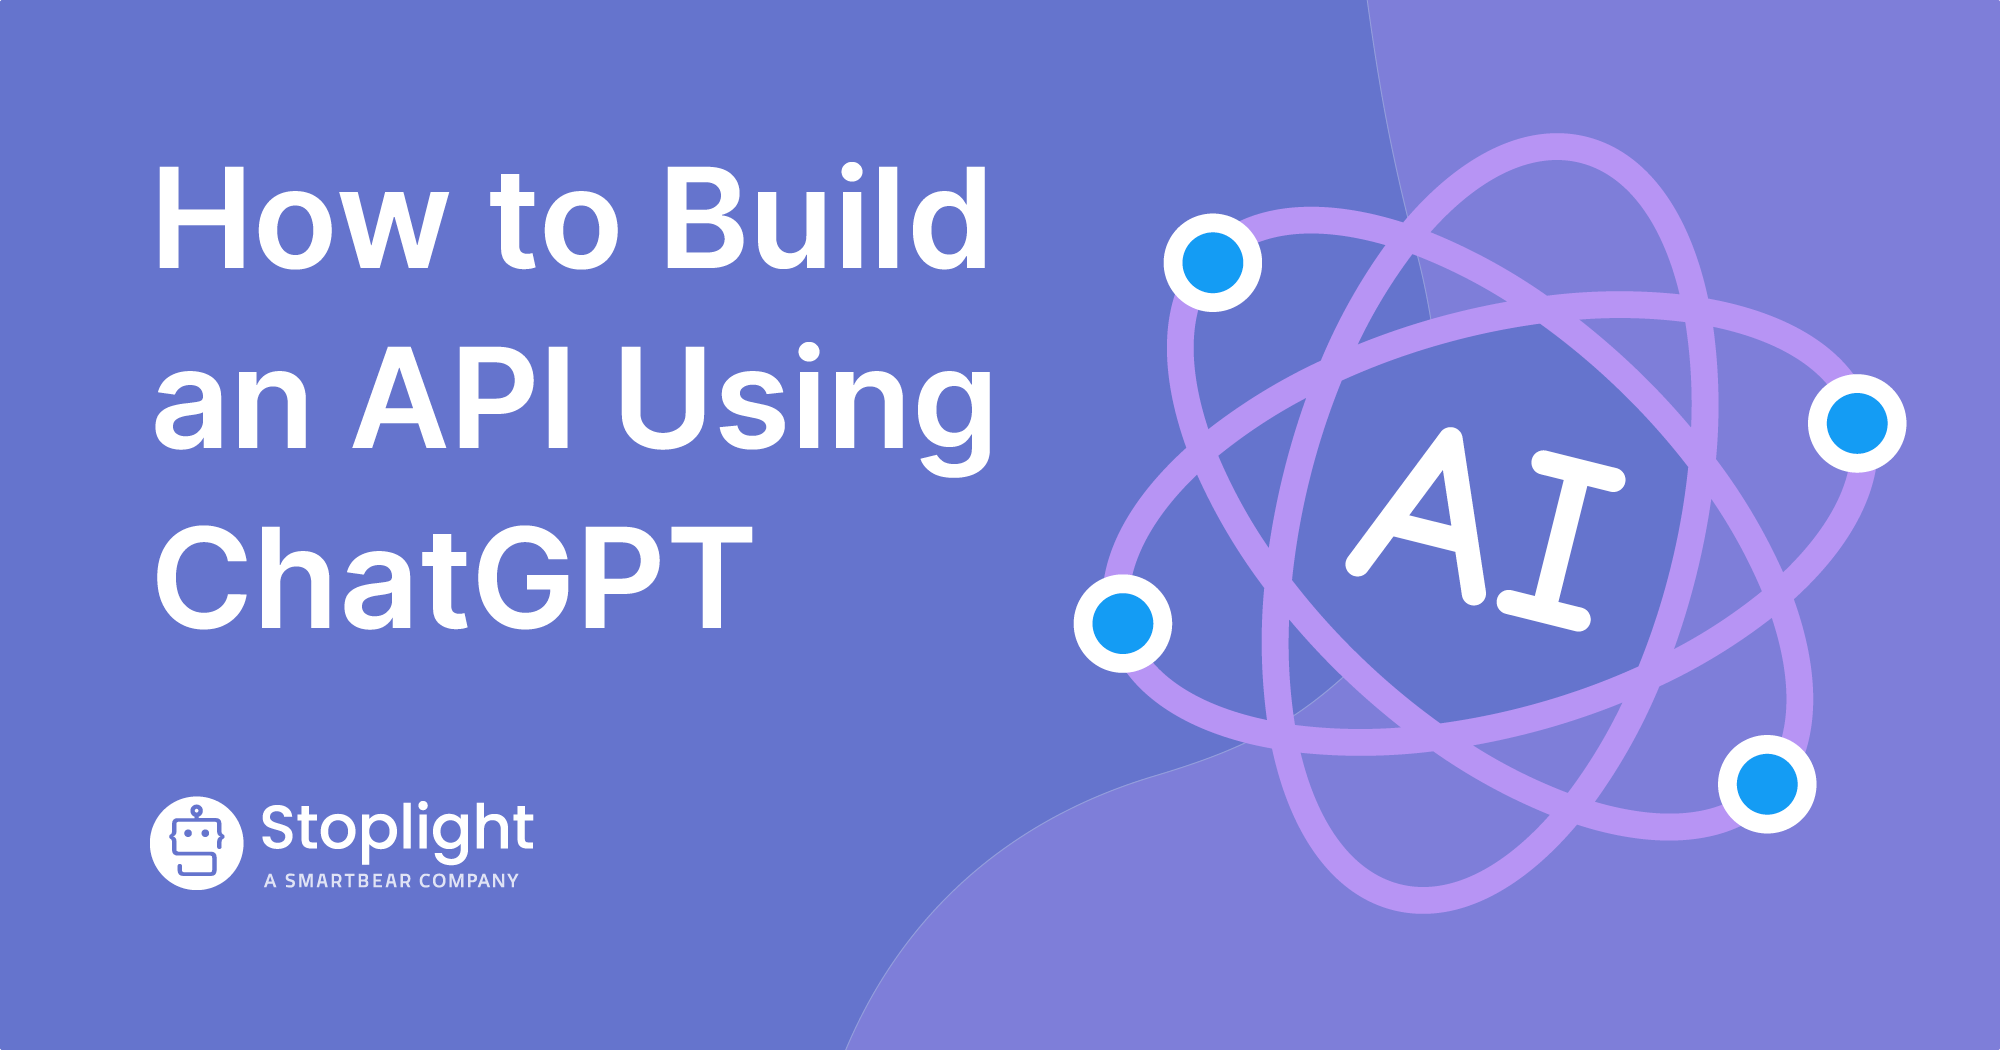 How to Build an API Using ChatGPT